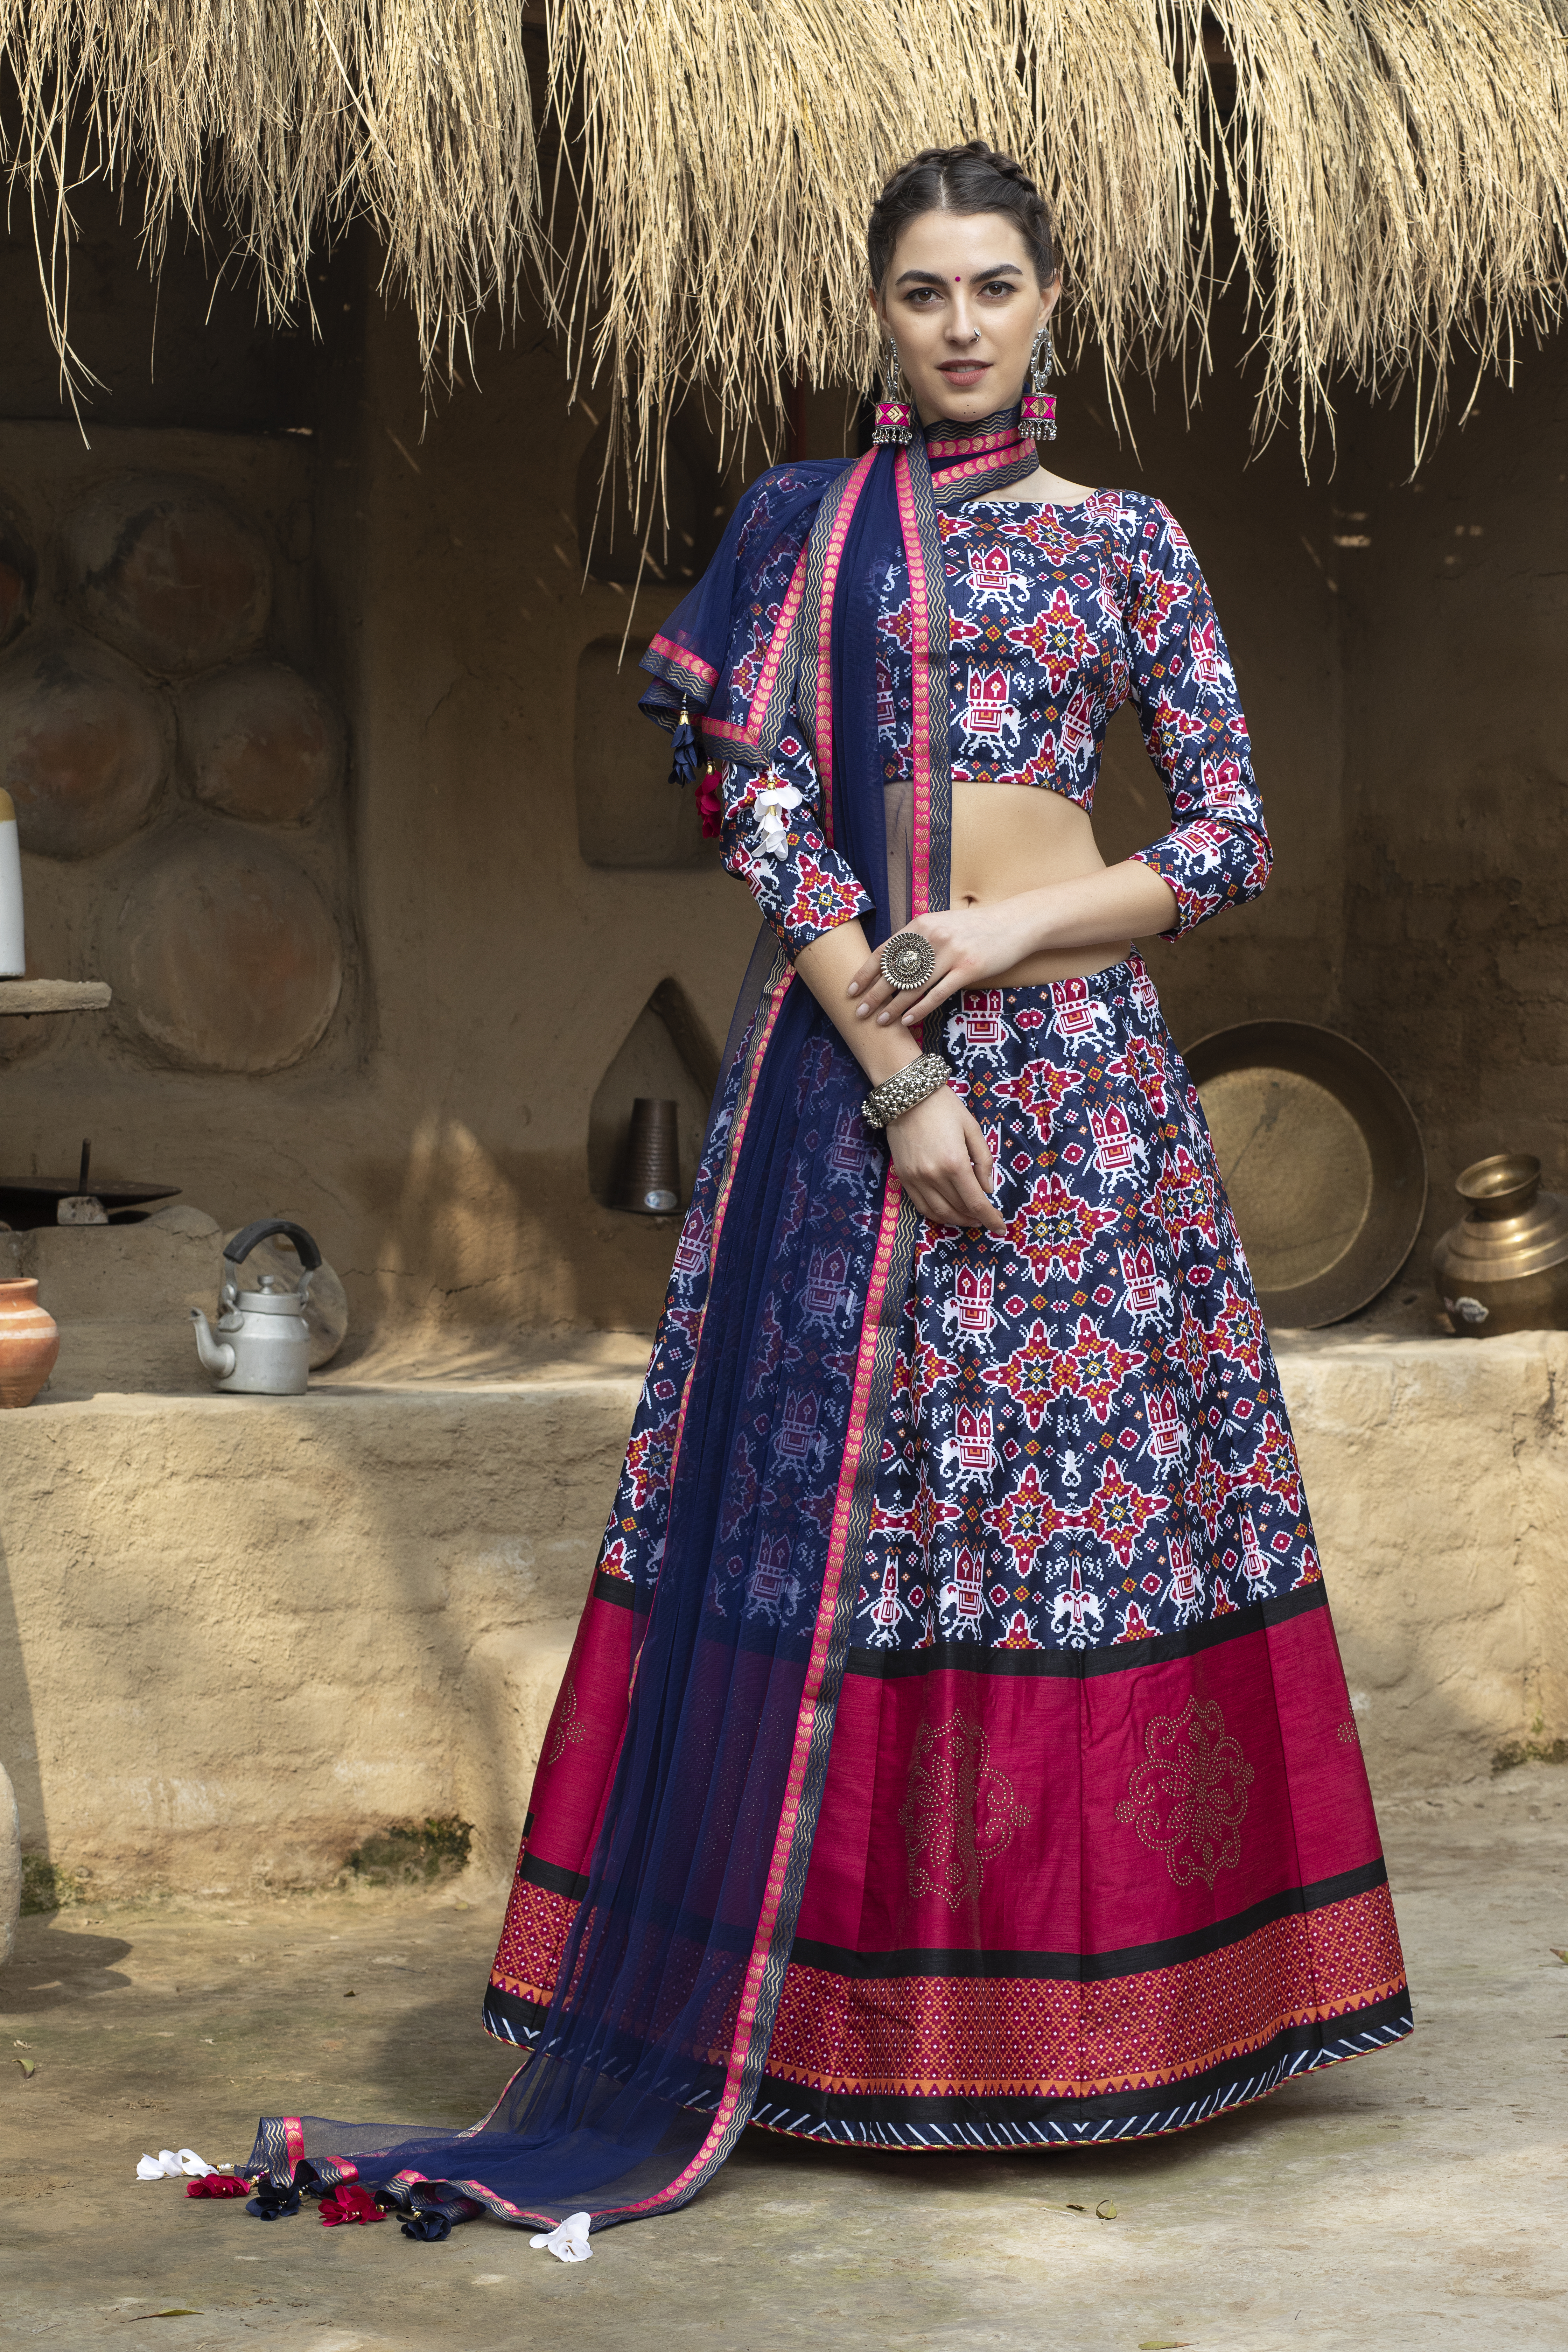 Her navy blue lehenga with a contrasting pink dupatta is such a unique  combination! Loving her min… | Indian outfits lehenga, Navy blue lehenga,  Minimal makeup look